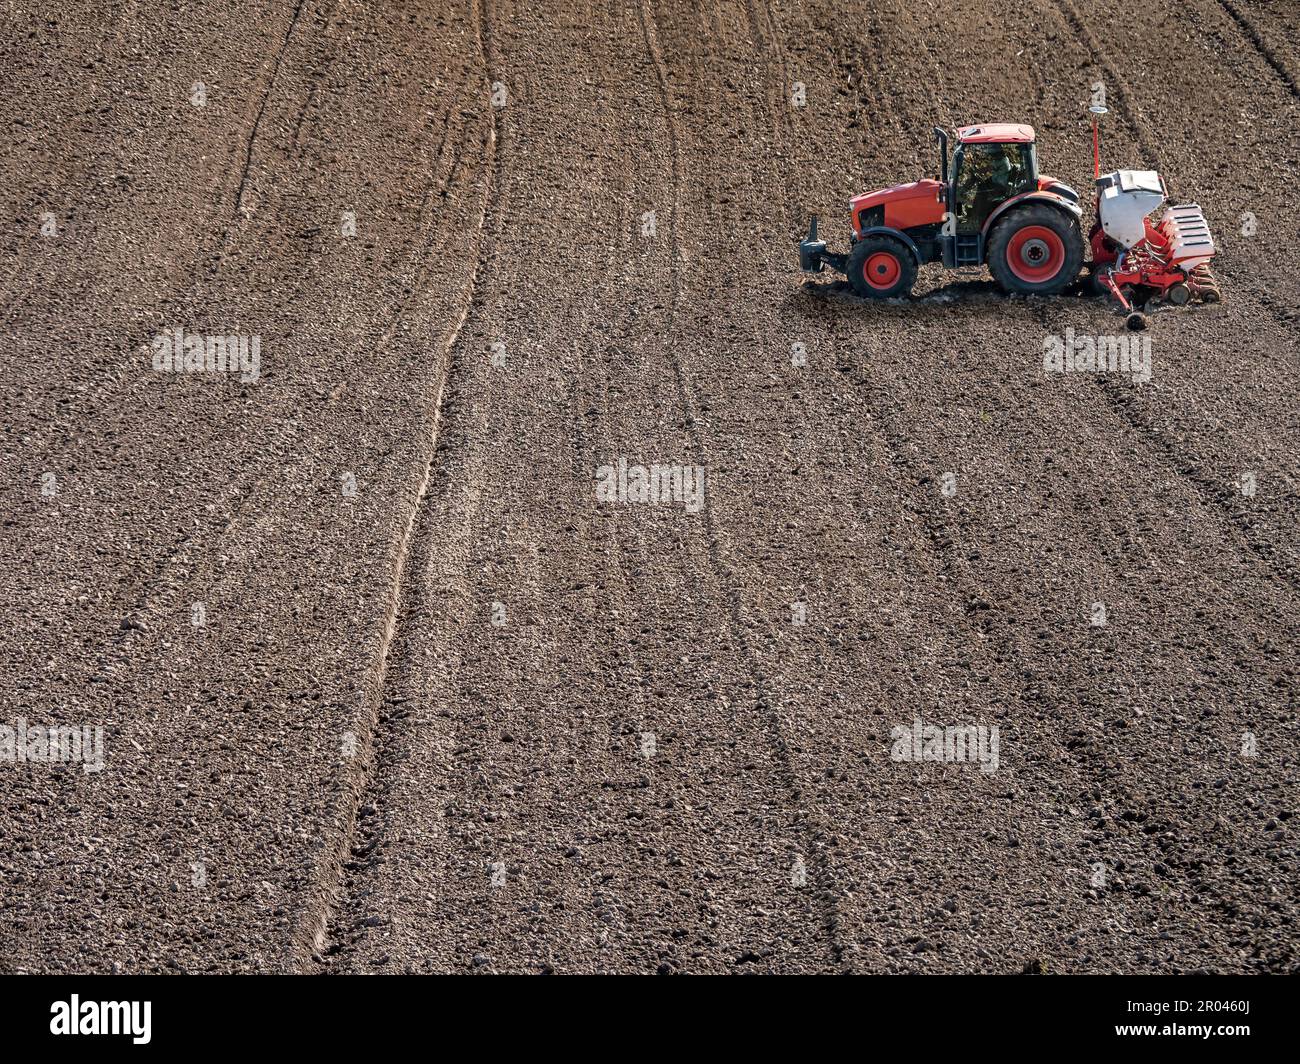 Arable field being planted by sowing machine Stock Photo